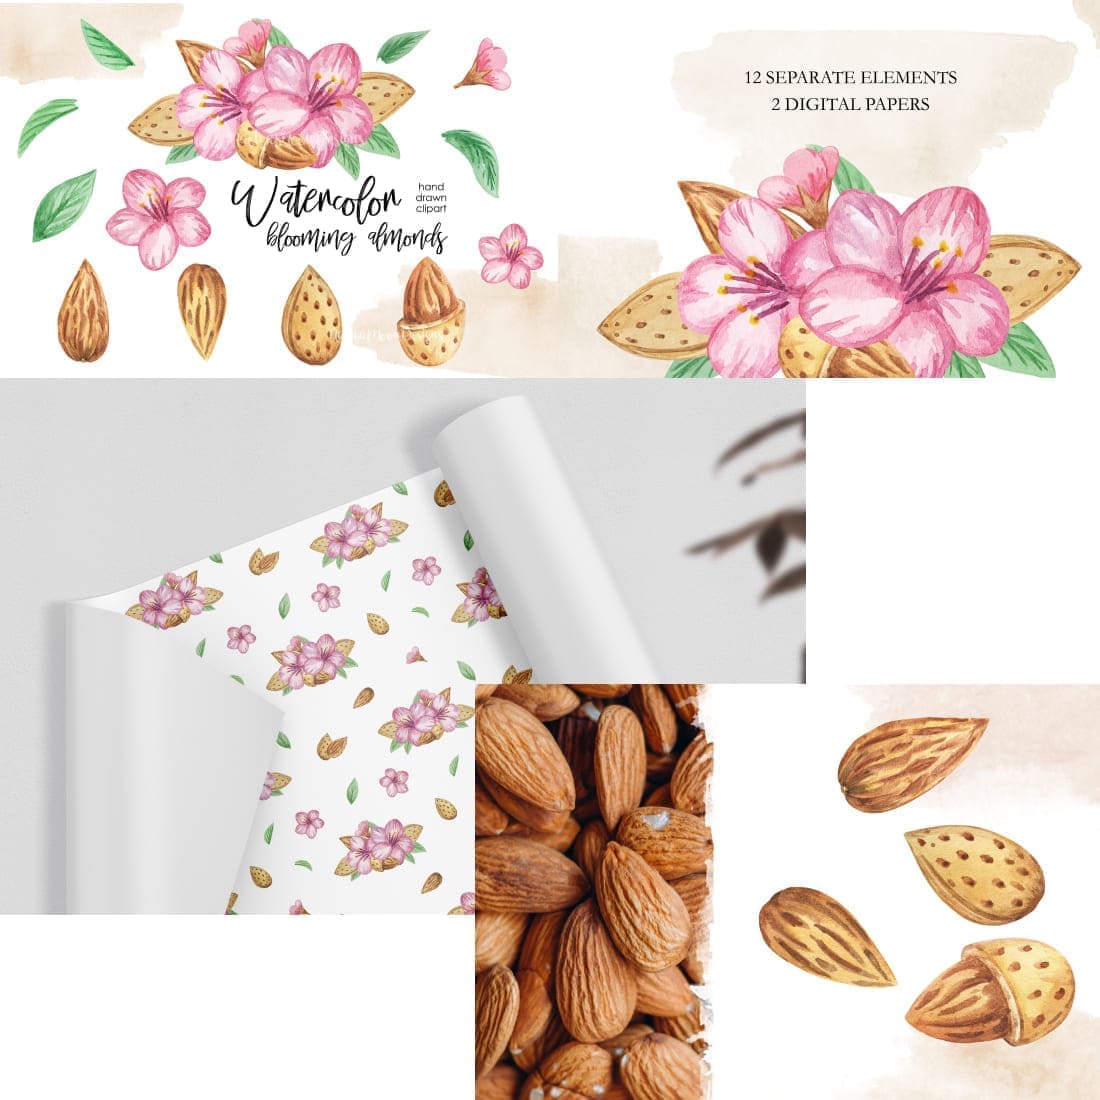 Watercolor painting 1100x1100 of almonds and inscriptions: "Watercolor flowering Almonds, 12 Separate elements, 2 Digital Papers".